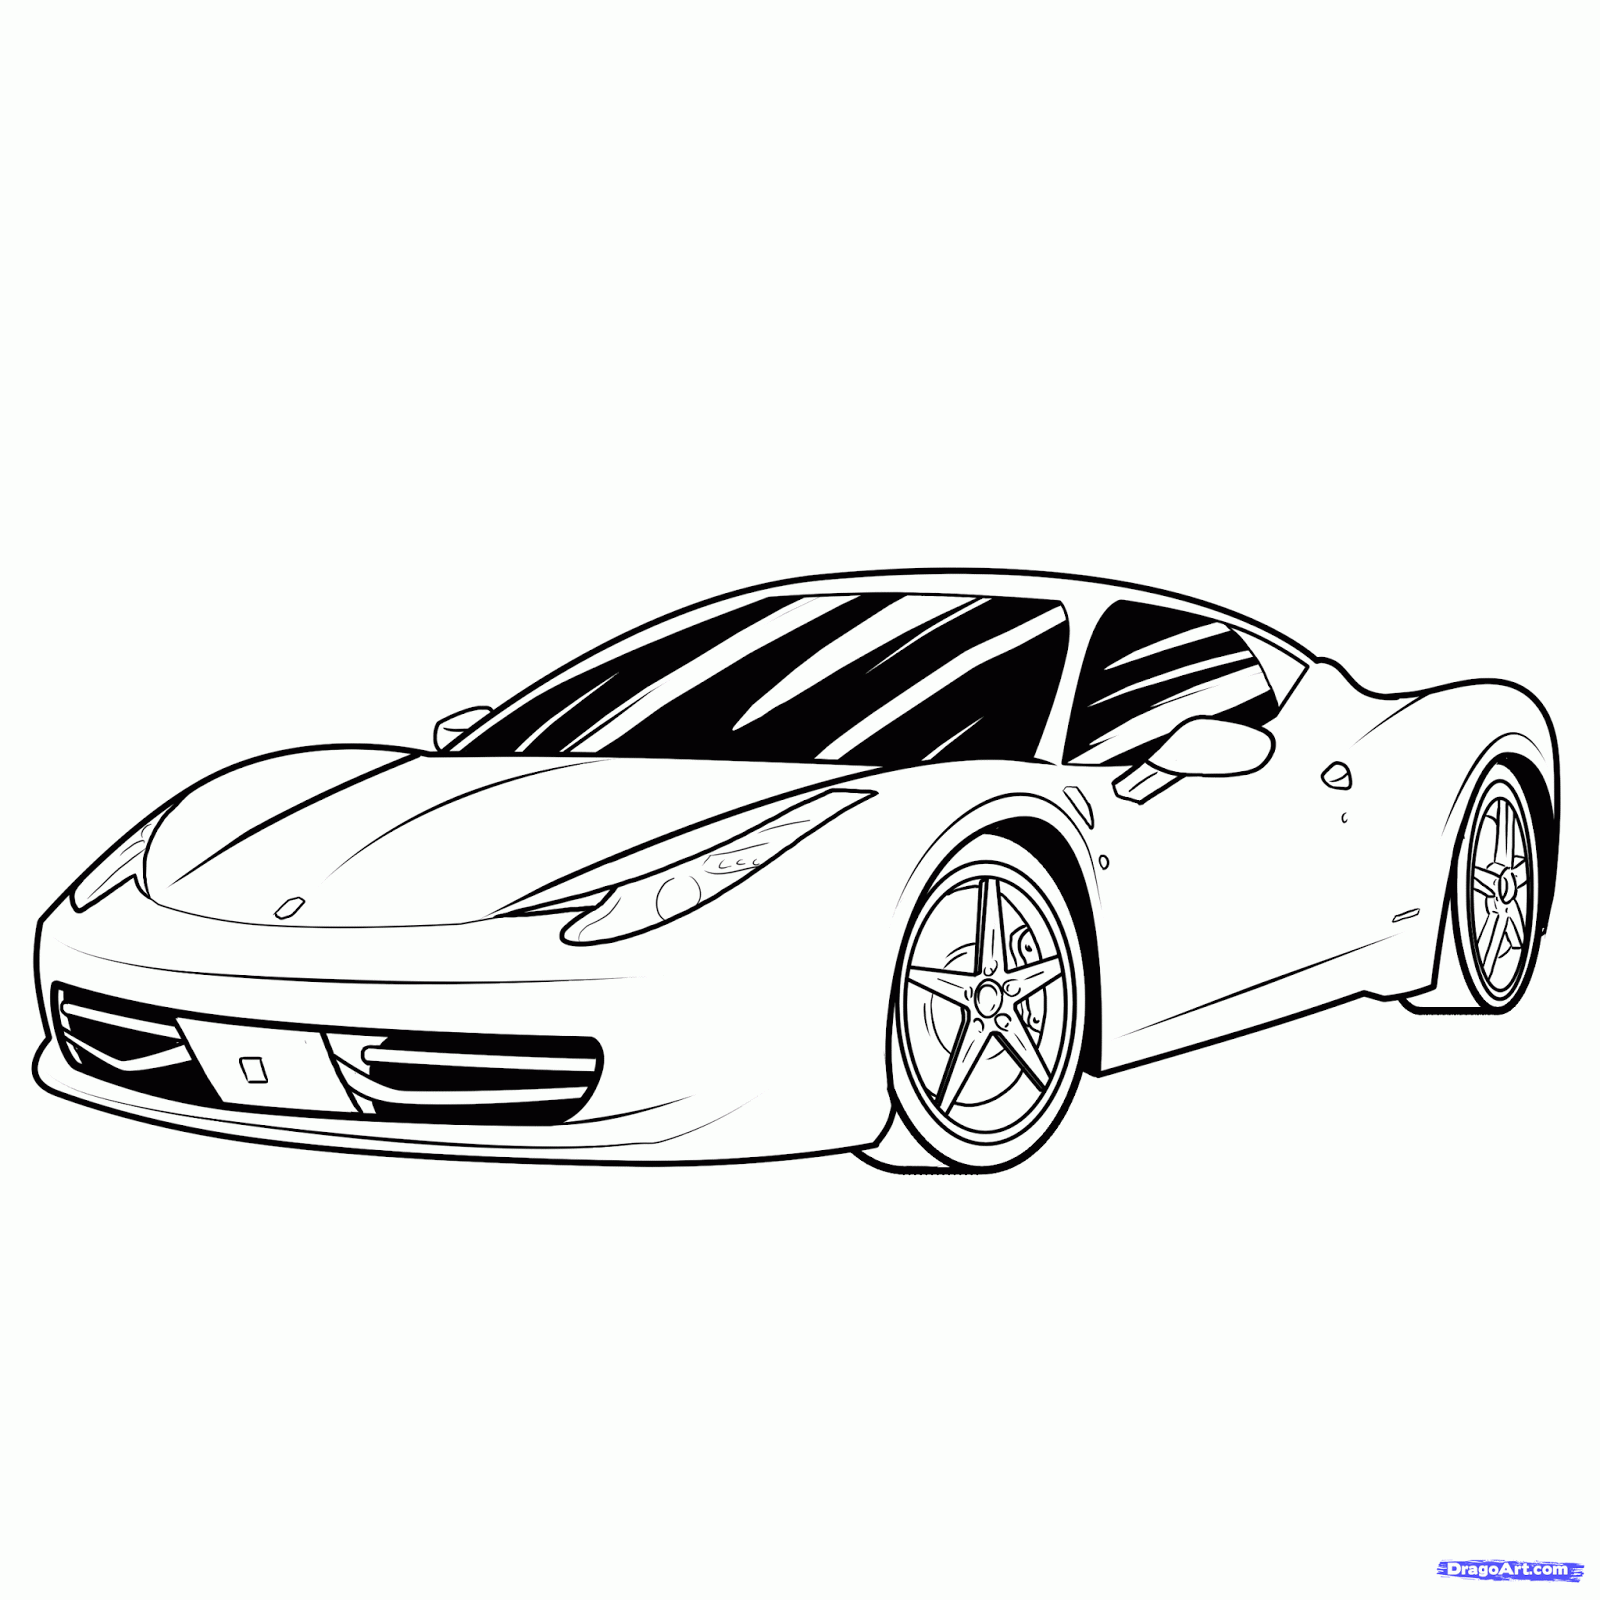 drawing of sports cars - Clip Art Library